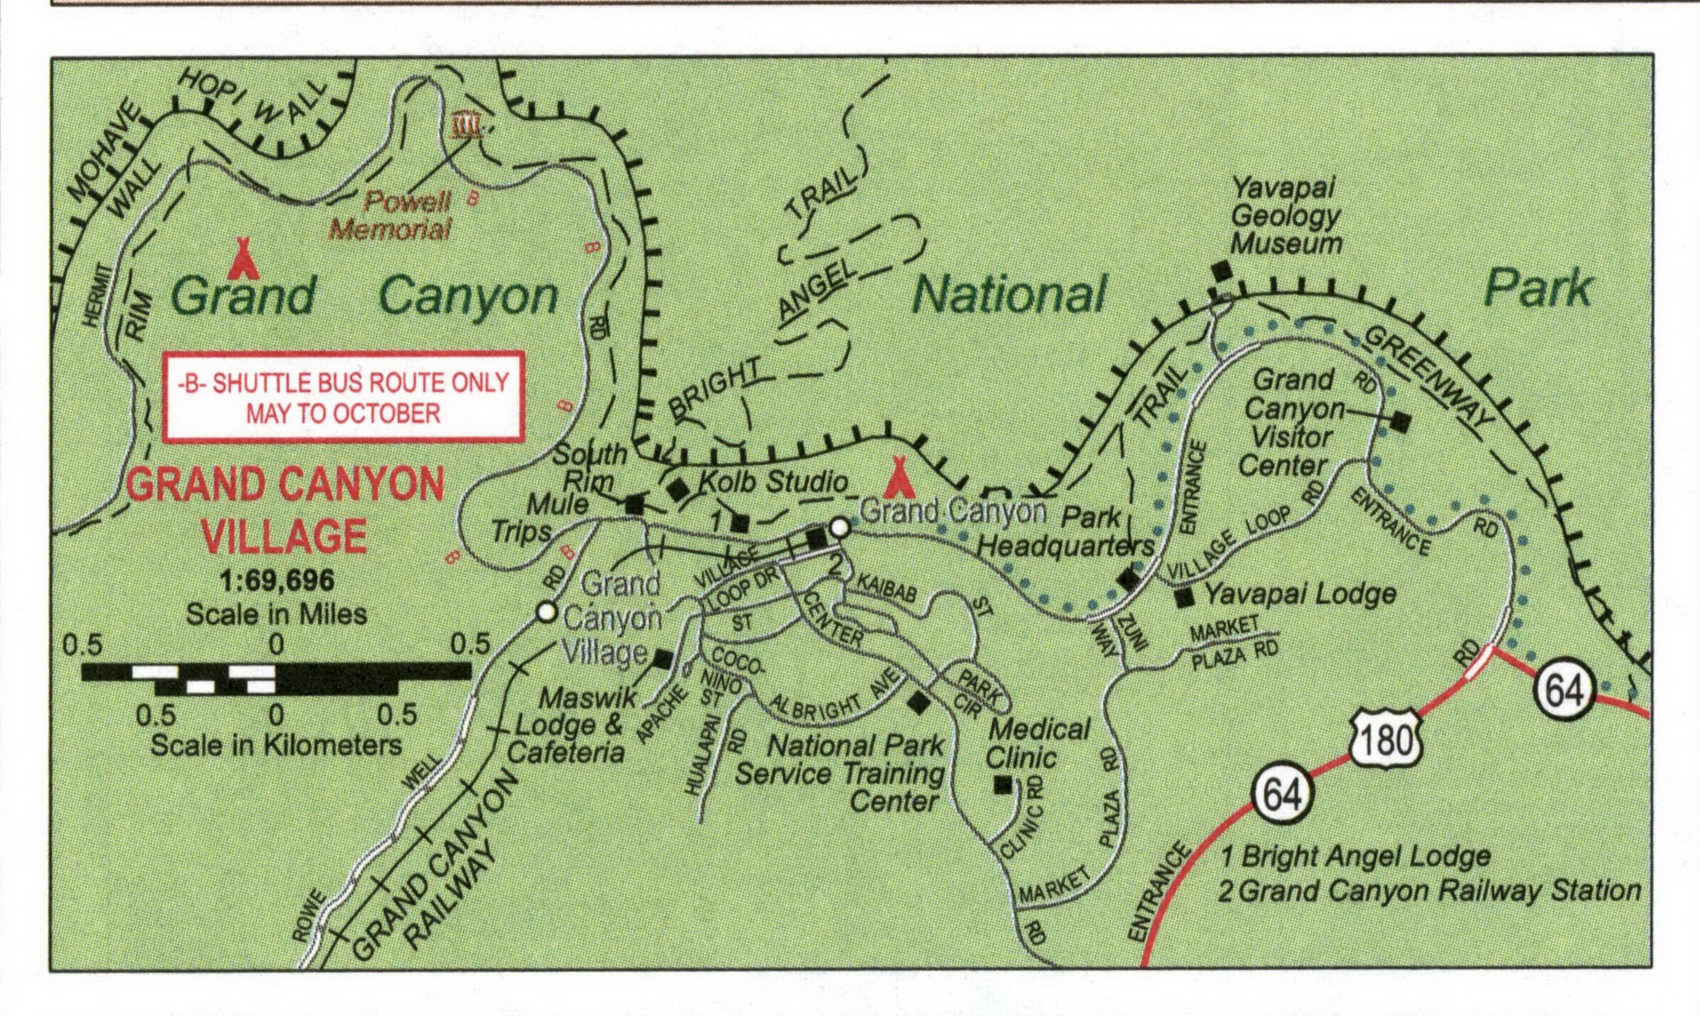 Map of Grand Canyon Village